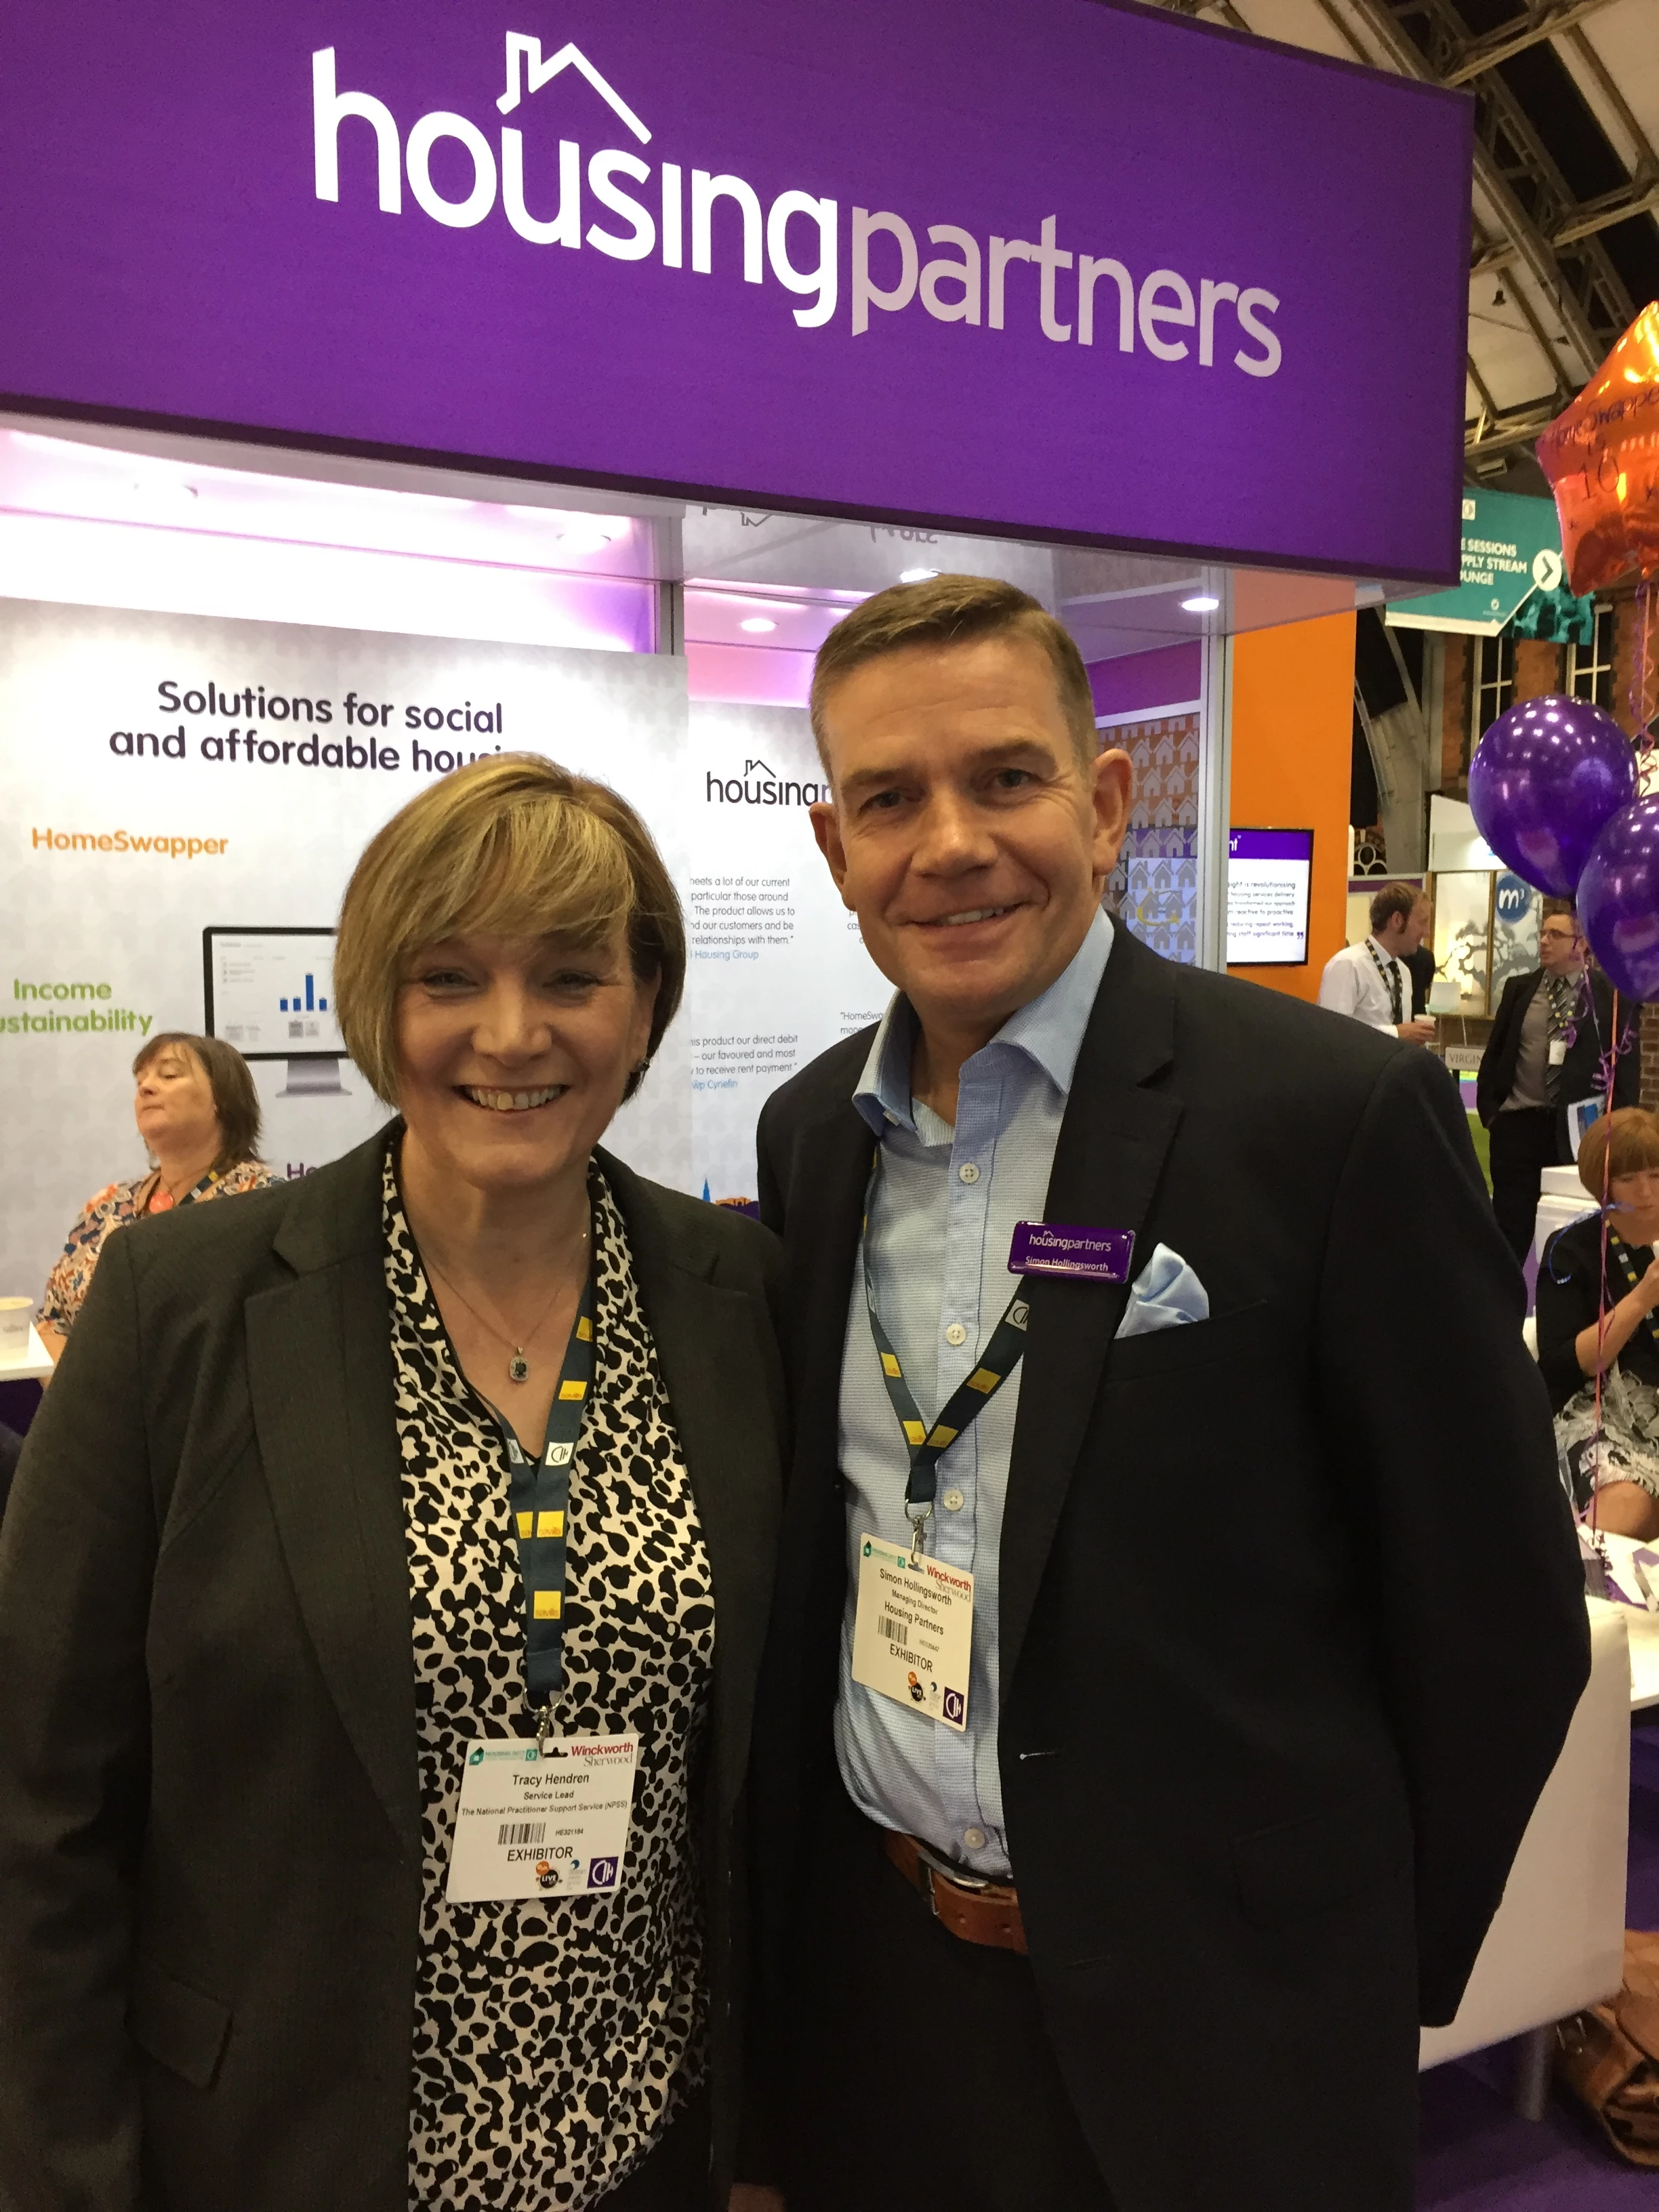 Tracy Hendren, service lead at NPSS, with Simon Hollingsworth, managing director of Housing Partners